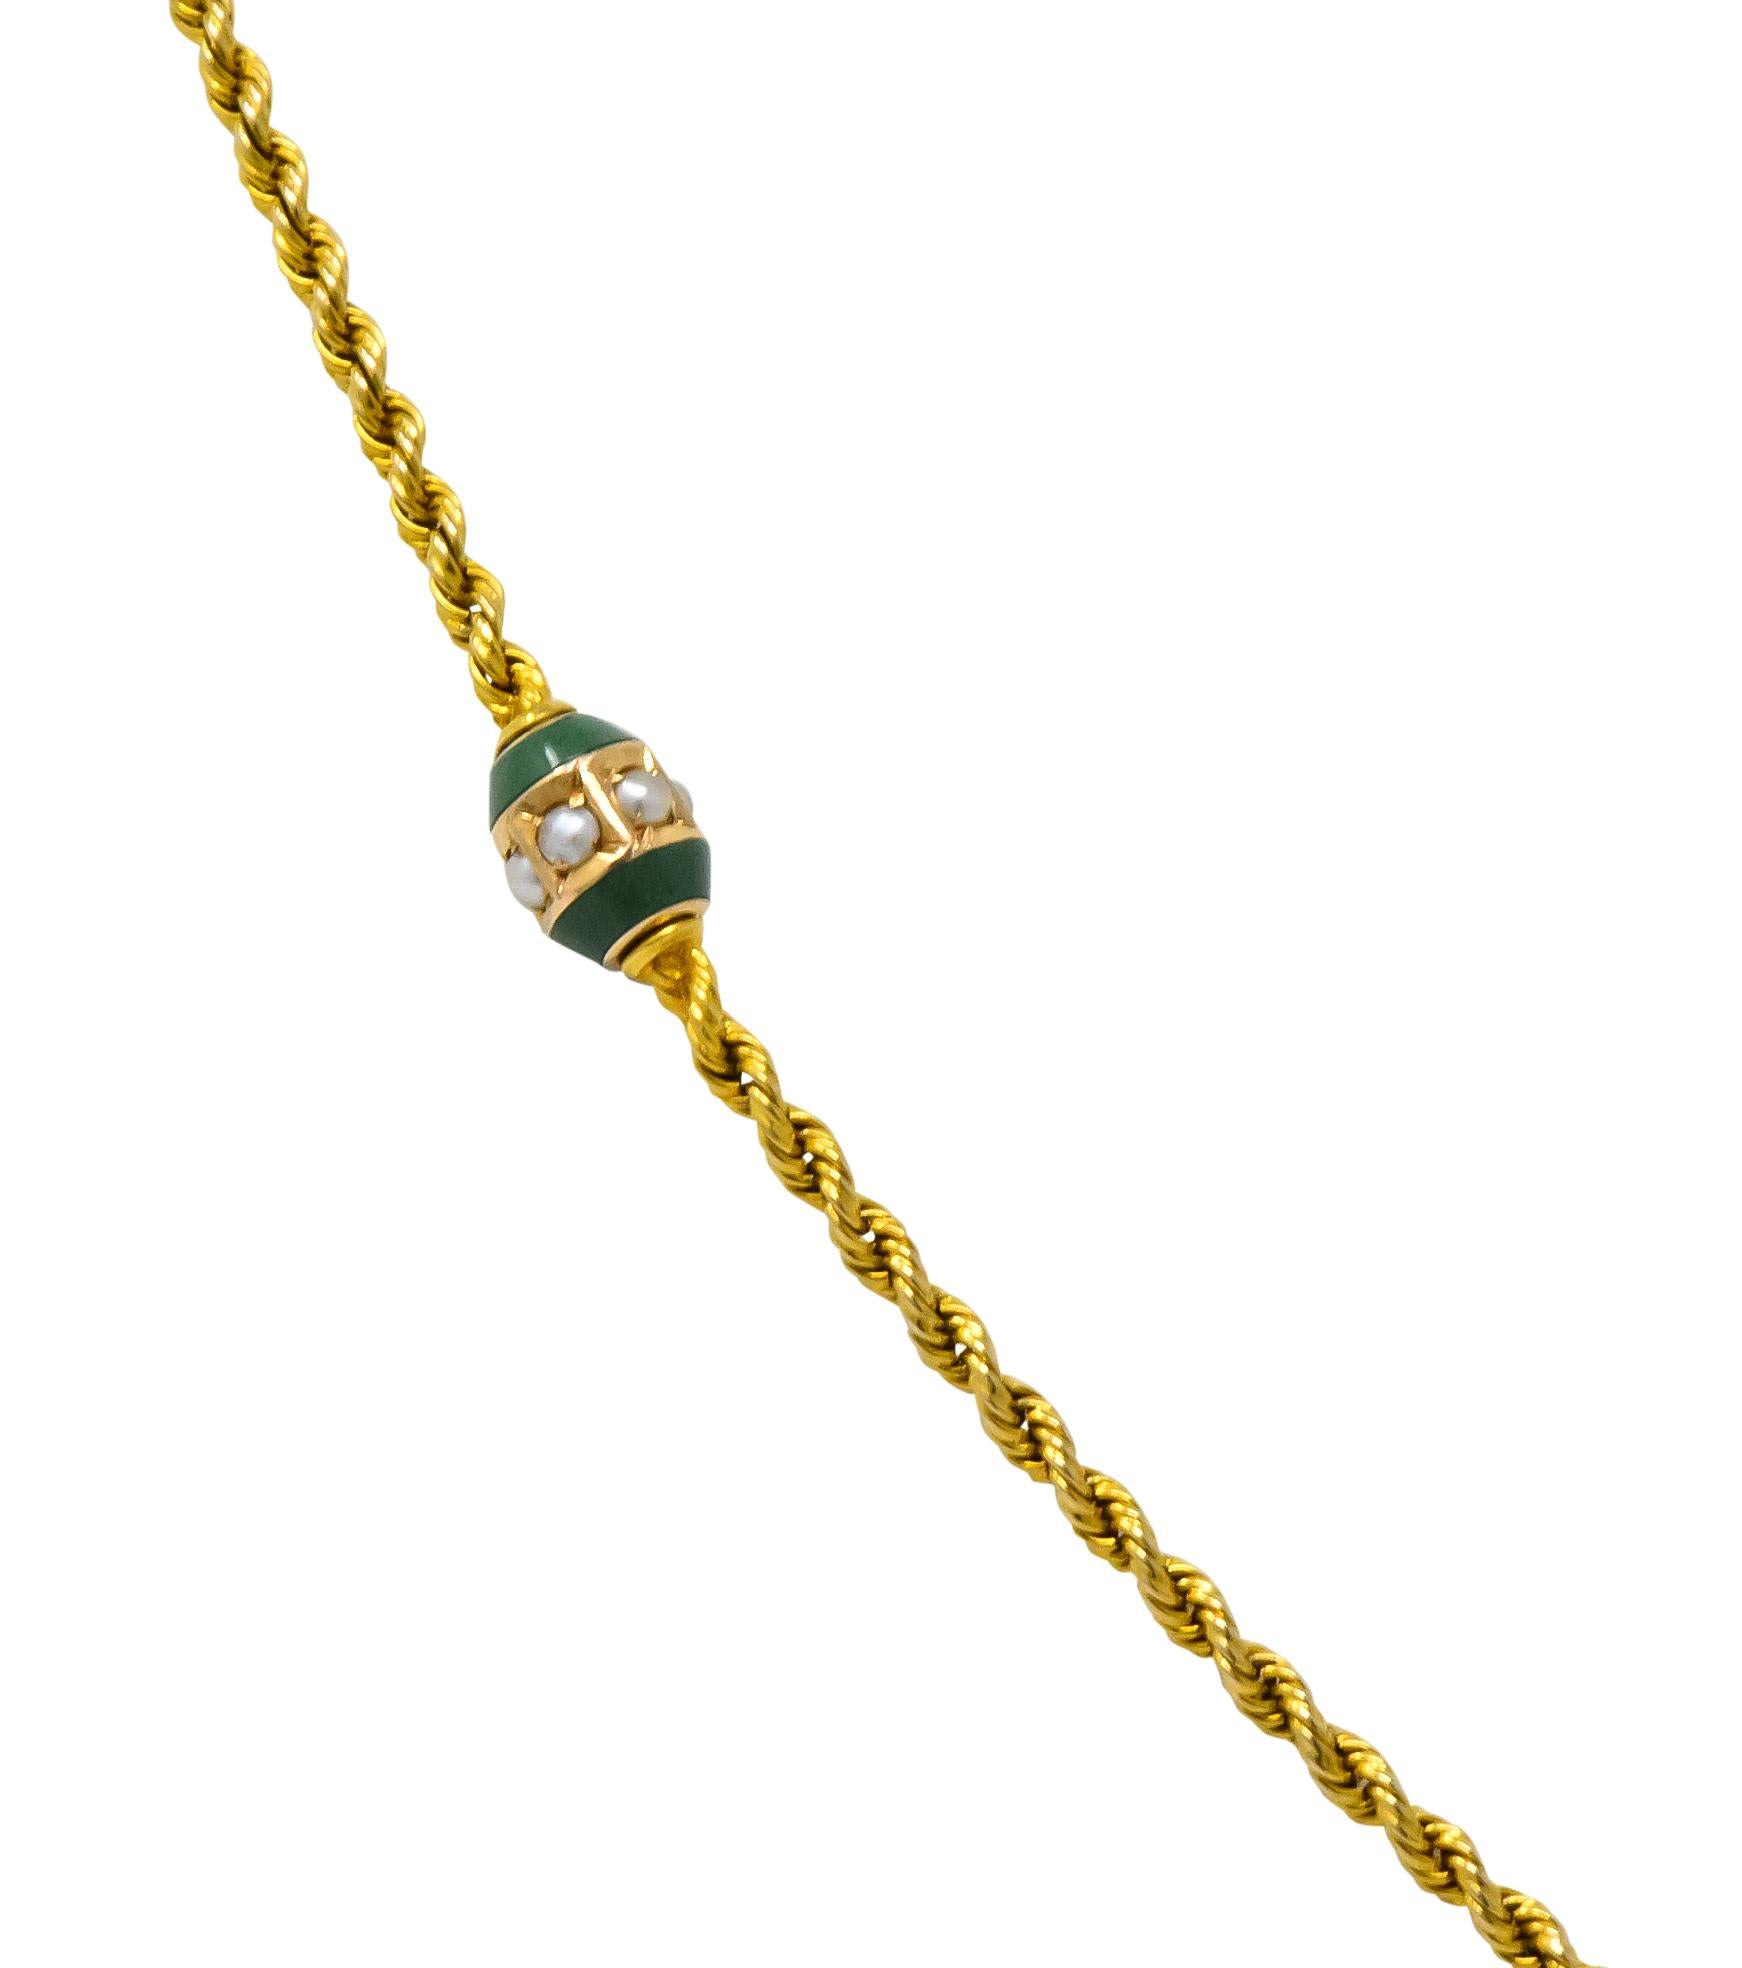 Designed as a long twisted rope chain featuring six jade capsule stations 

Each centering a gold band set with seed pearls

Completed by a spring ring clasp

Stamped 14K for 14 karat gold

Circa: 1880

Length: 48 1/2 inches

Width at widest: 4.0